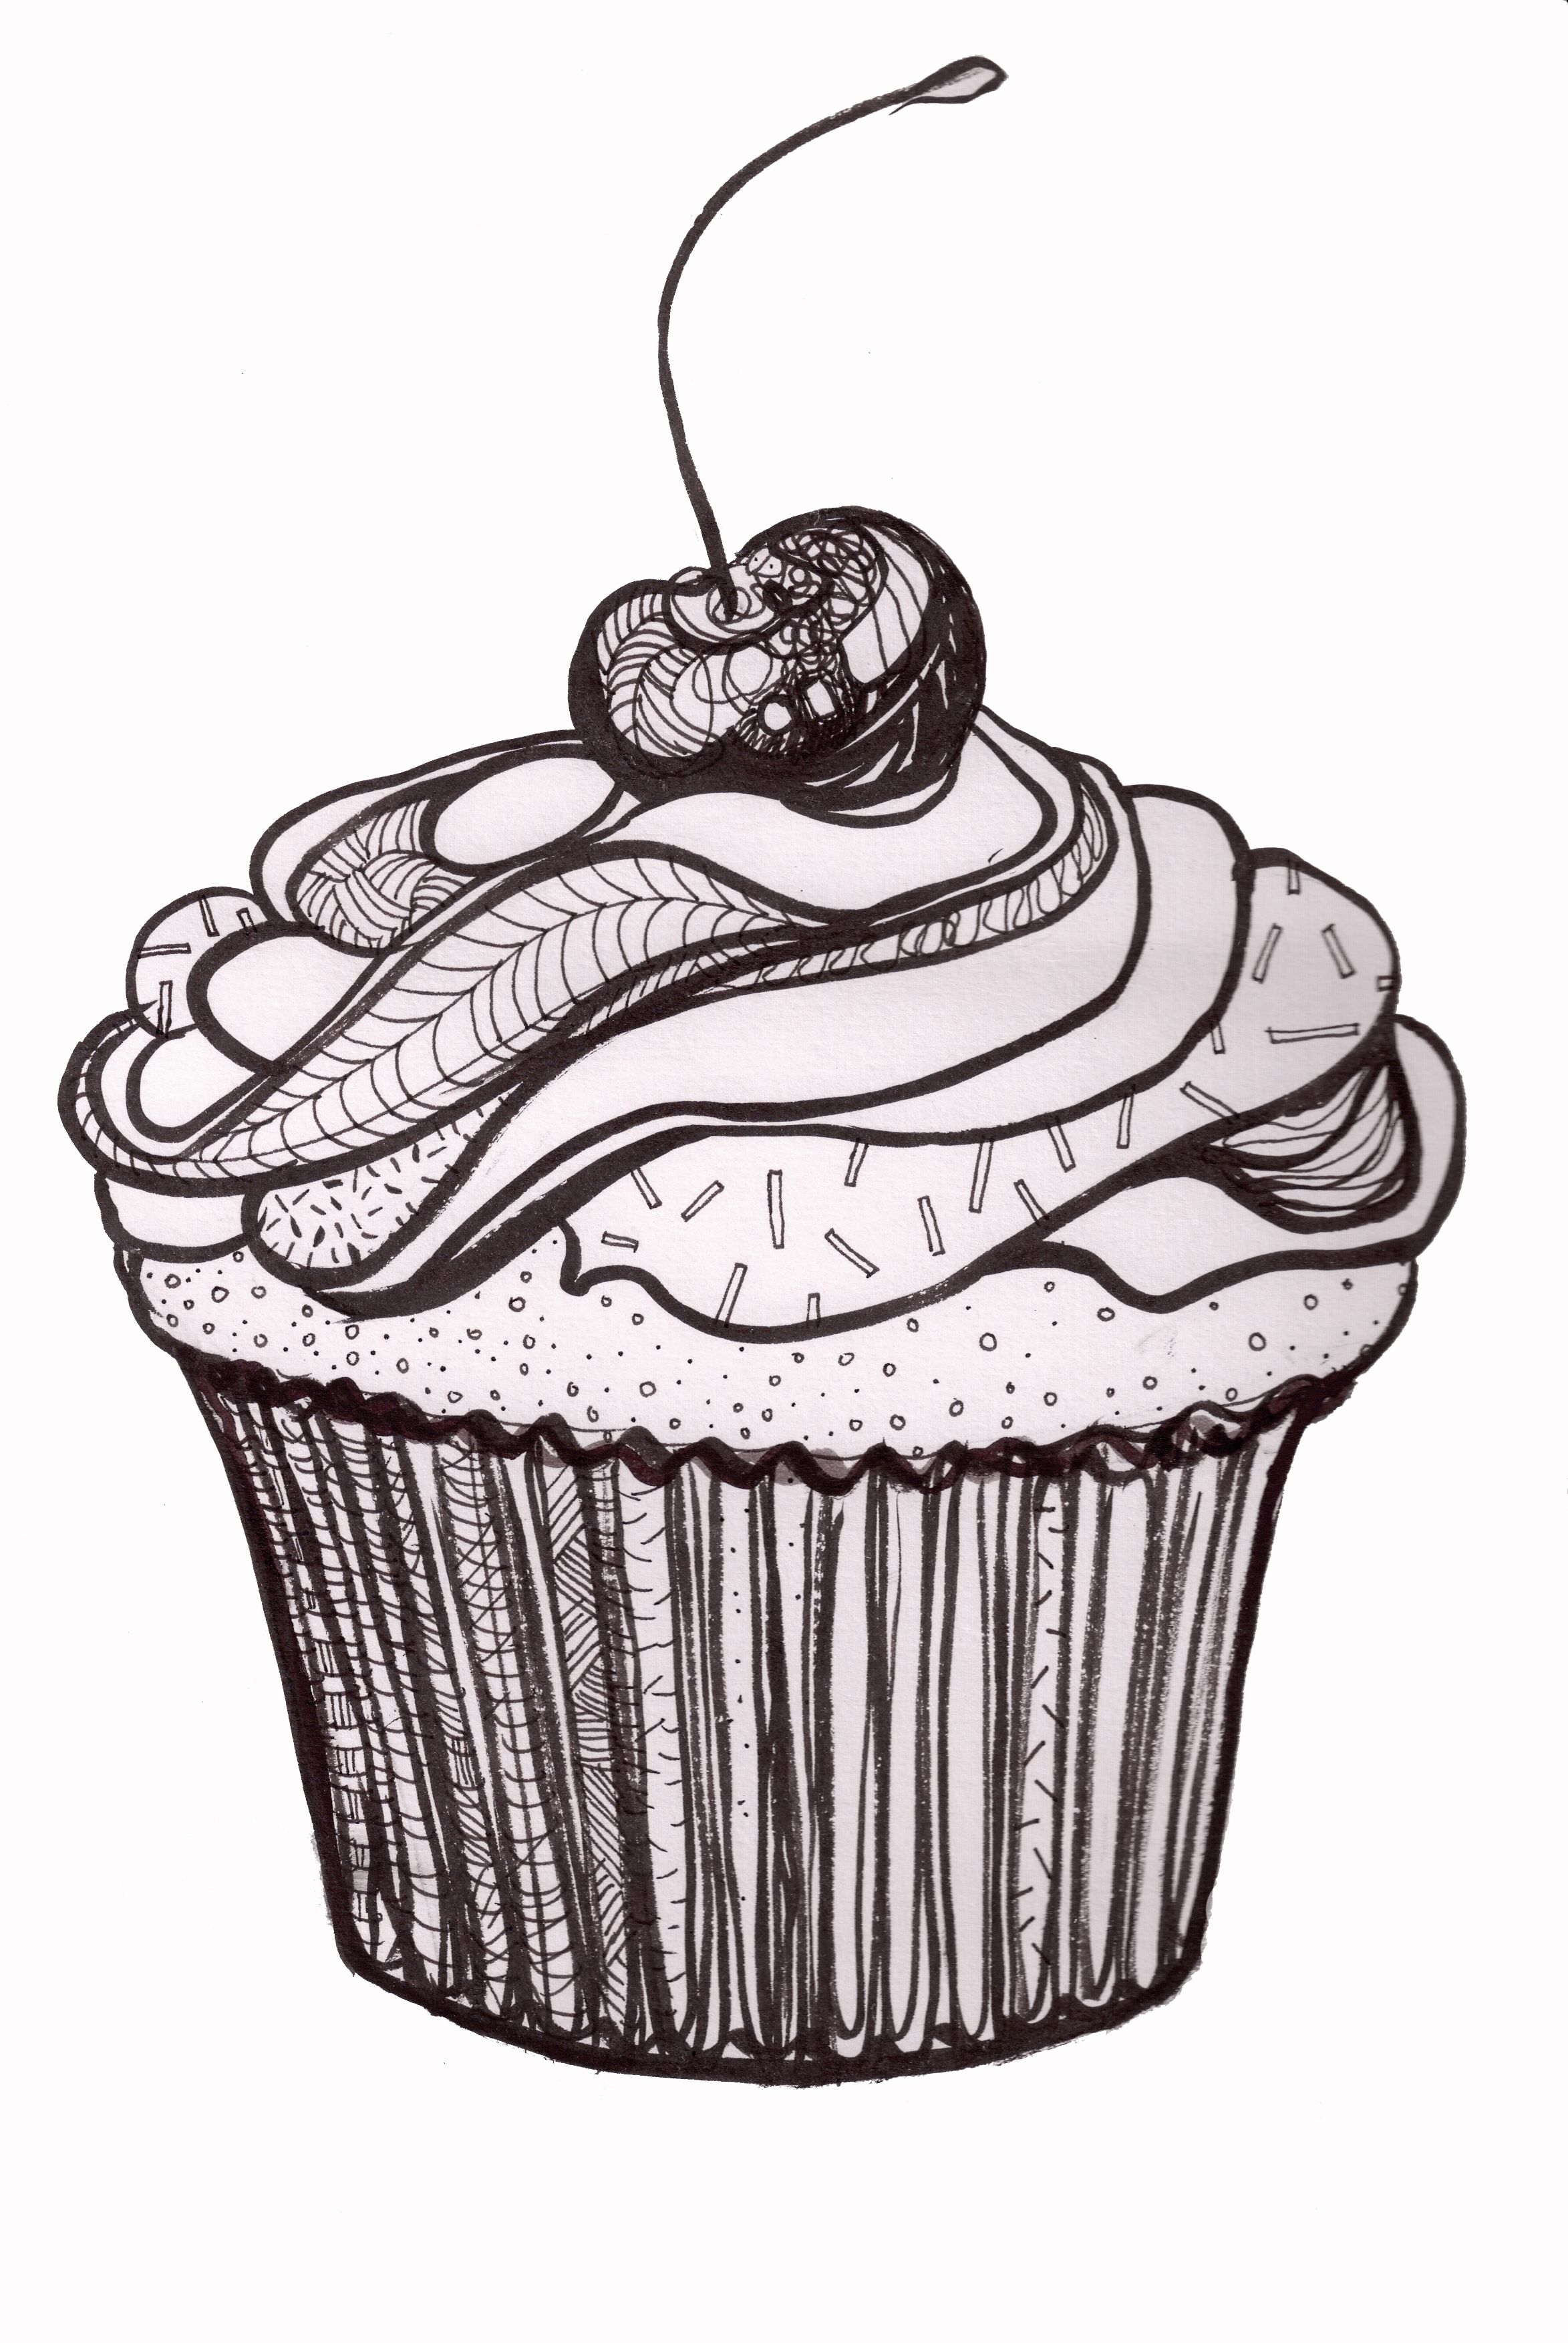 Cupcake Drawing Designs Free download on ClipArtMag